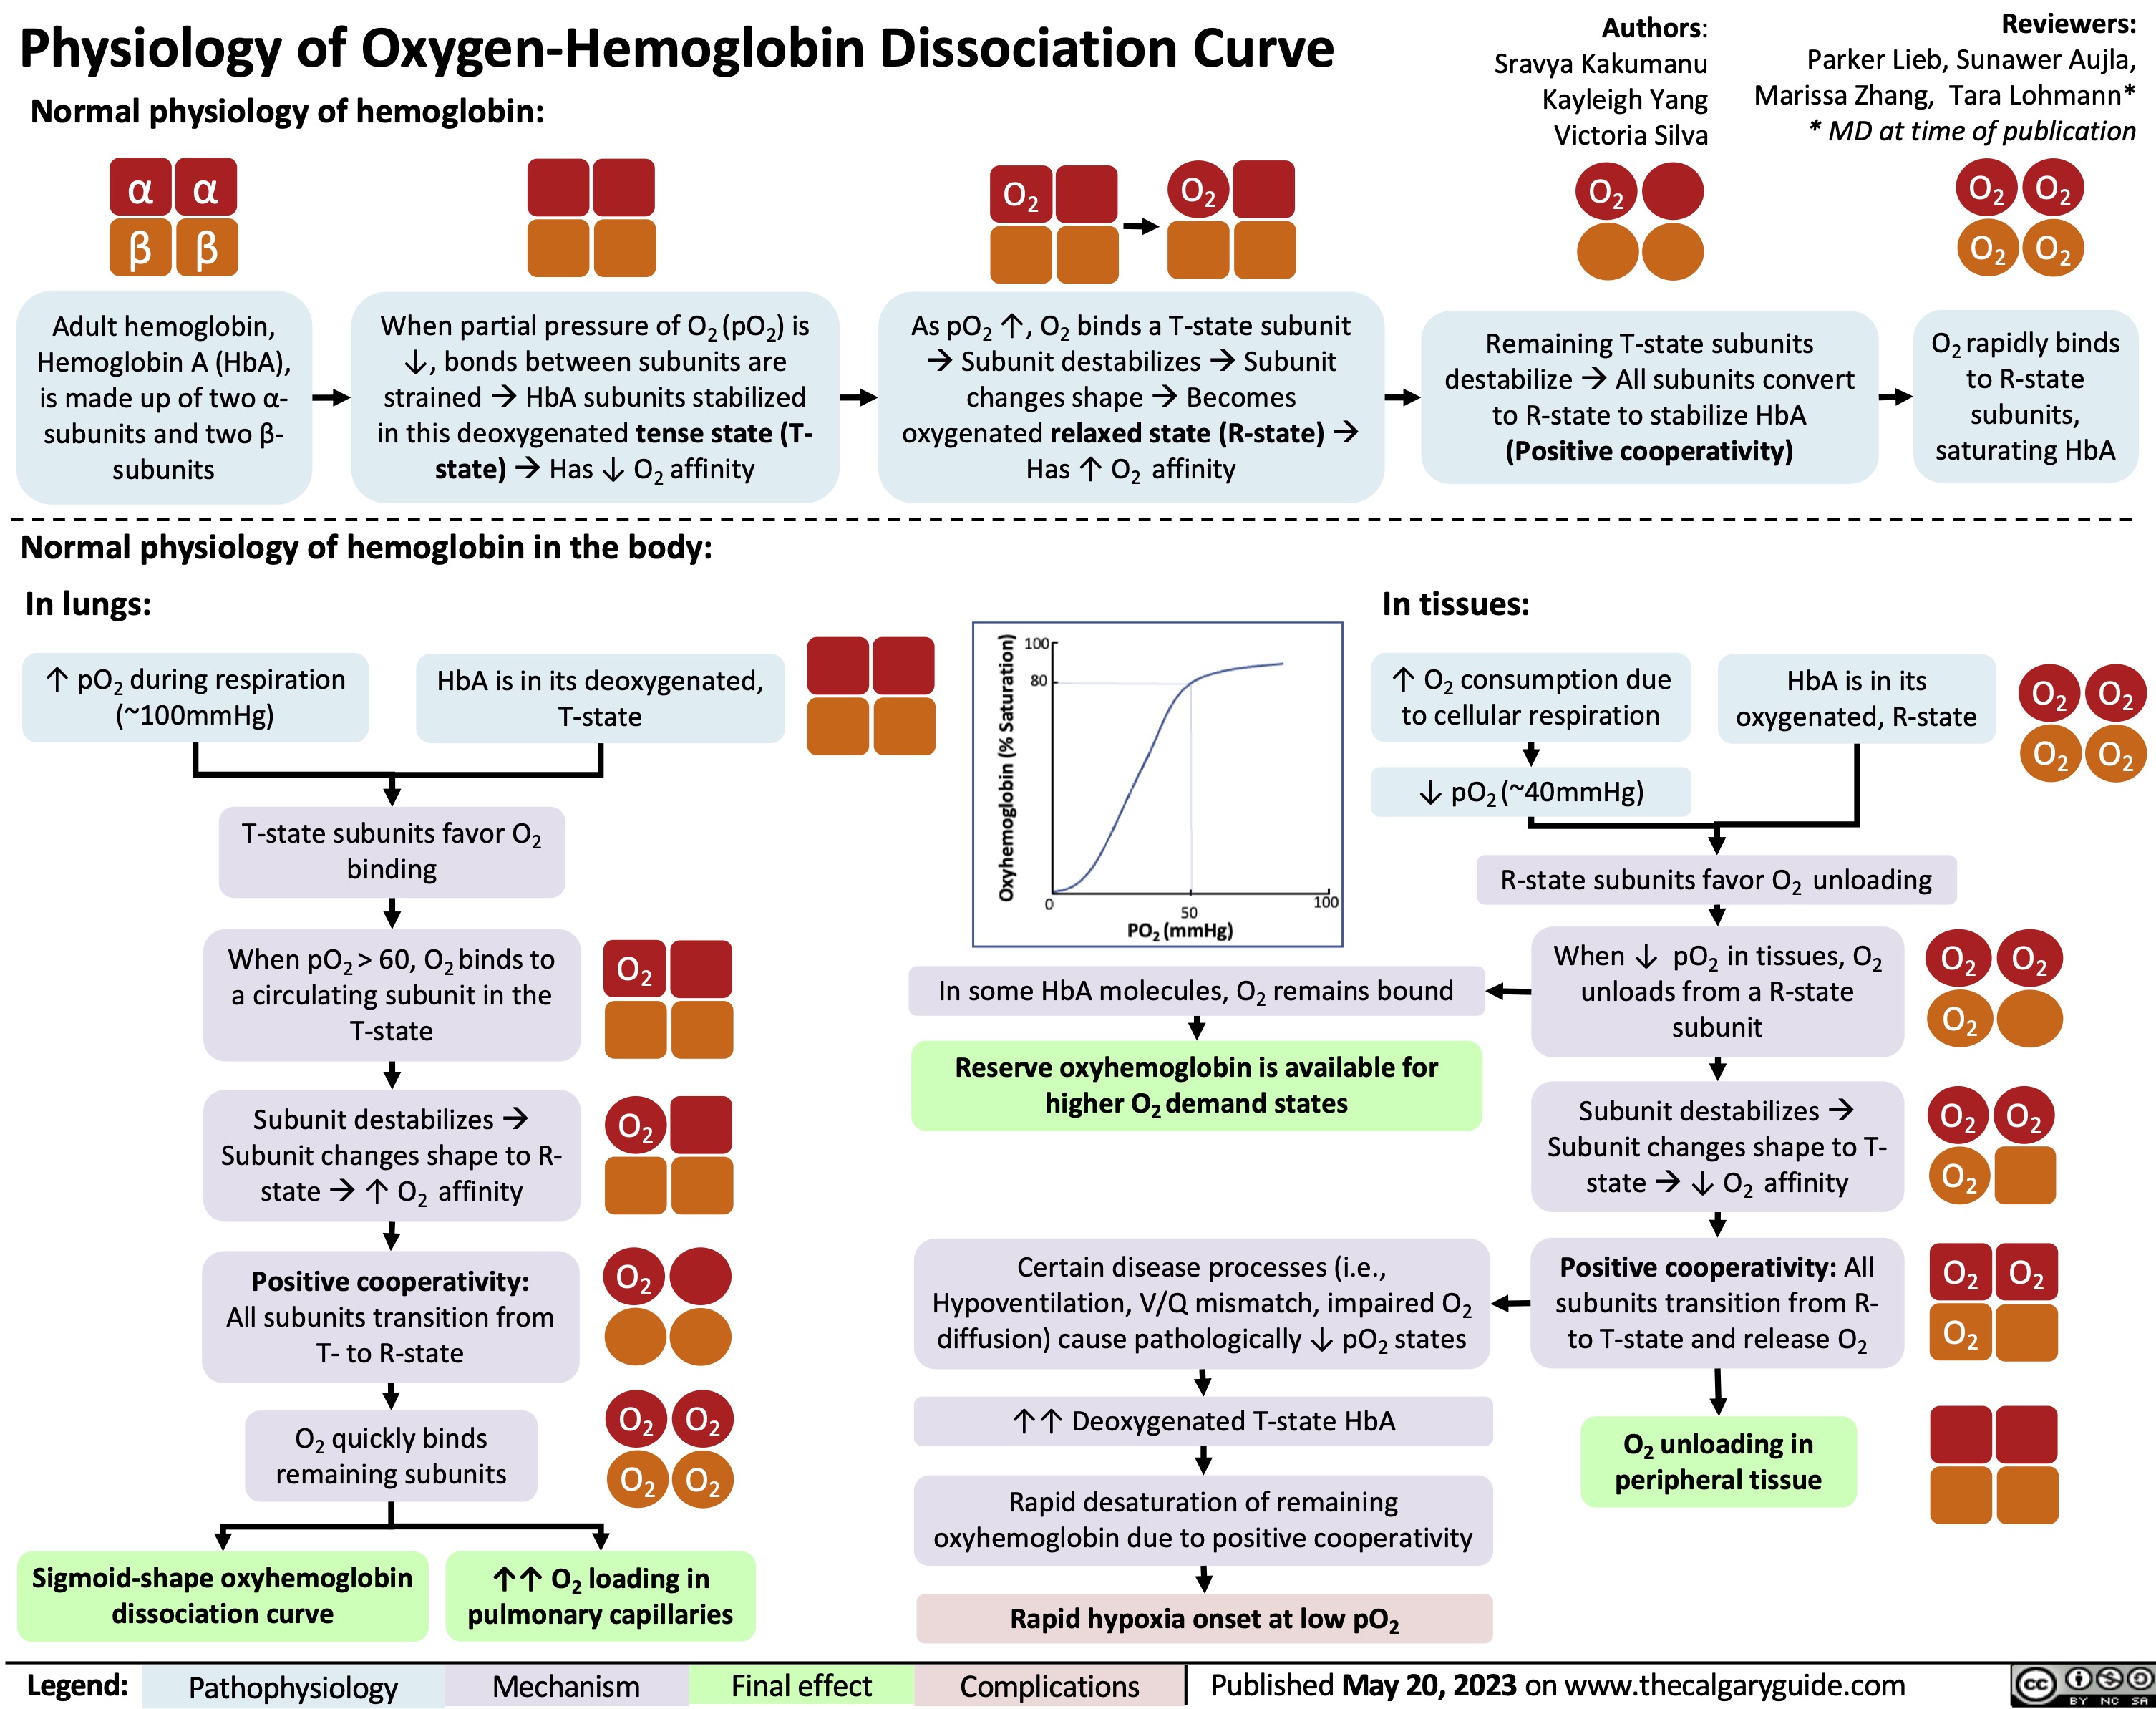 Physiology of Oxygen-Hemoglobin Dissociation Curve
Authors: Sravya Kakumanu Kayleigh Yang Victoria Silva
O2
Remaining T-state subunits destabilizeàAll subunits convert to R-state to stabilize HbA (Positive cooperativity)
Normal physiology of hemoglobin:
α α β β
Adult hemoglobin, Hemoglobin A (HbA), is made up of two α- subunits and two β- subunits
When partial pressure of O2 (pO2) is ↓, bonds between subunits are strainedàHbA subunits stabilized in this deoxygenated tense state (T- state)àHas ↓ O2 affinity
O2 O2
As pO2 ↑, O2 binds a T-state subunit àSubunit destabilizesàSubunit changes shapeàBecomes oxygenated relaxed state (R-state)à Has ↑ O2 affinity
O2 O2 O2 O2
O2 rapidly binds to R-state subunits, saturating HbA
Reviewers:
Parker Lieb, Sunawer Aujla, Marissa Zhang, Tara Lohmann* * MD at time of publication
      Normal physiology of hemoglobin in the body: In lungs:
In tissues:
↑ O2 consumption due to cellular respiration
     ↑ pO2 during respiration (~100mmHg)
HbA is in its deoxygenated, T-state
HbA is in its oxygenated, R-state
O2 O2 O2 O2
    T-state subunits favor O2 binding
When pO2 > 60, O2 binds to a circulating subunit in the T-state
Subunit destabilizesà Subunit changes shape to R- stateà↑ O2 affinity
Positive cooperativity:
All subunits transition from T- to R-state
O2 quickly binds remaining subunits
↓ pO2 (~40mmHg) R-statesubunitsfavorO2 unloading
   O2
O2
O2
O2 O2 O2 O2
In some HbA molecules, O2 remains bound
Reserve oxyhemoglobin is available for higher O2 demand states
Certain disease processes (i.e., Hypoventilation, V/Q mismatch, impaired O2 diffusion) cause pathologically ↓ pO2 states
↑↑ Deoxygenated T-state HbA
Rapid desaturation of remaining oxyhemoglobin due to positive cooperativity
Rapid hypoxia onset at low pO2
When ↓ pO2 in tissues, O2 unloads from a R-state subunit
Subunit destabilizesà Subunit changes shape to T- stateà↓ O2 affinity
Positive cooperativity: All subunits transition from R- to T-state and release O2
O2 unloading in peripheral tissue
O2 O2
 O
O2 O2
2
   O
O2 O2
O
2
   2
       Sigmoid-shape oxyhemoglobin ↑↑ O2 loading in dissociation curve pulmonary capillaries
  Legend:
 Pathophysiology
 Mechanism
Final effect
  Complications
 Published , 2022 on www.thecalgaryguide.com
 